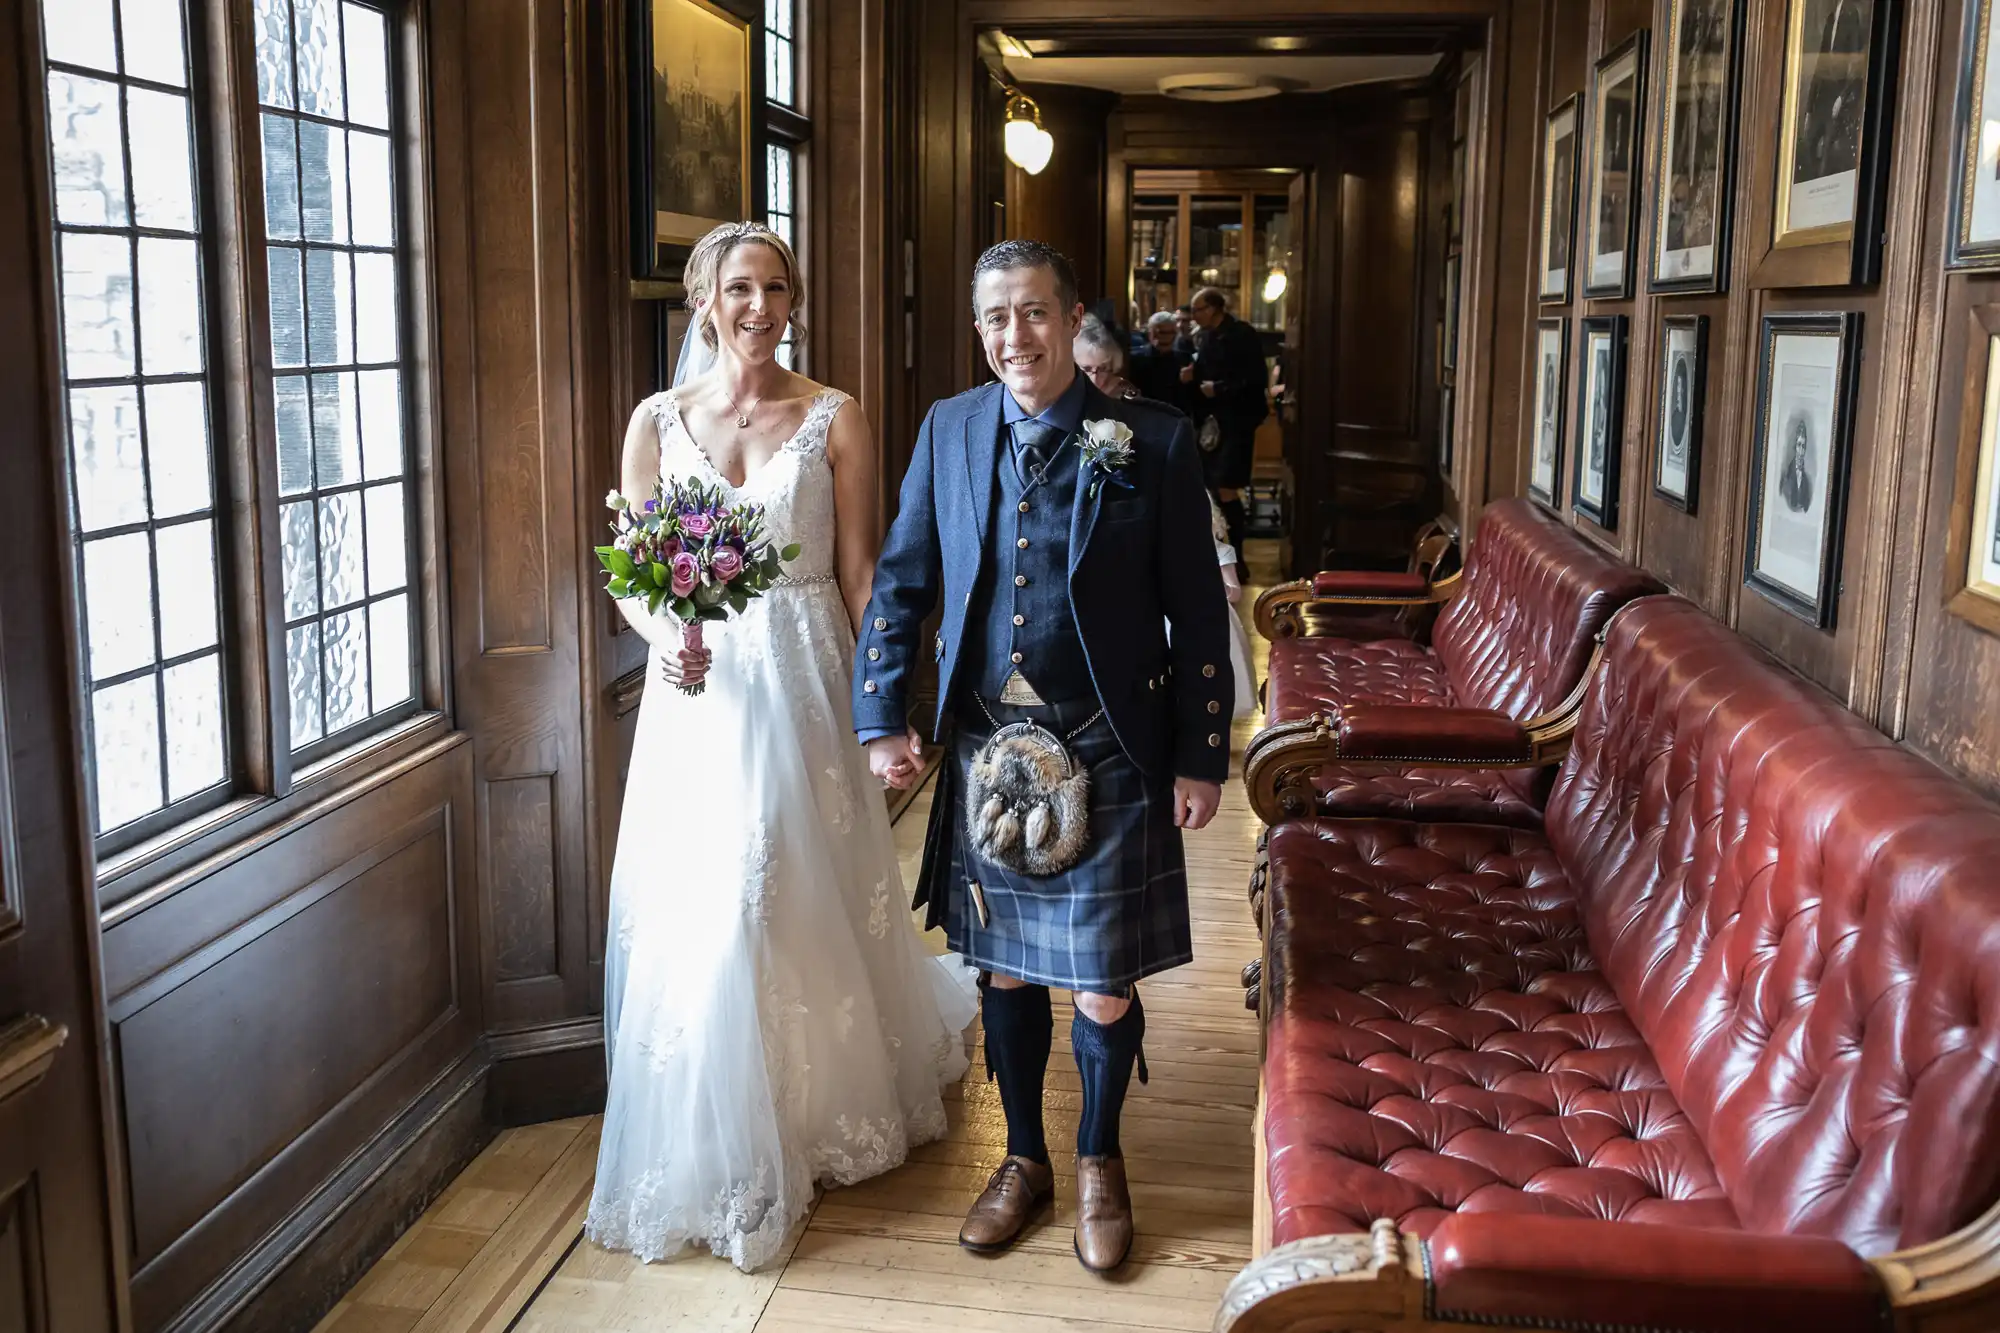 A bride in a white gown and a groom in traditional Scottish attire, including a kilt, walk hand in hand down a wood-paneled hallway lined with framed pictures and red leather benches.